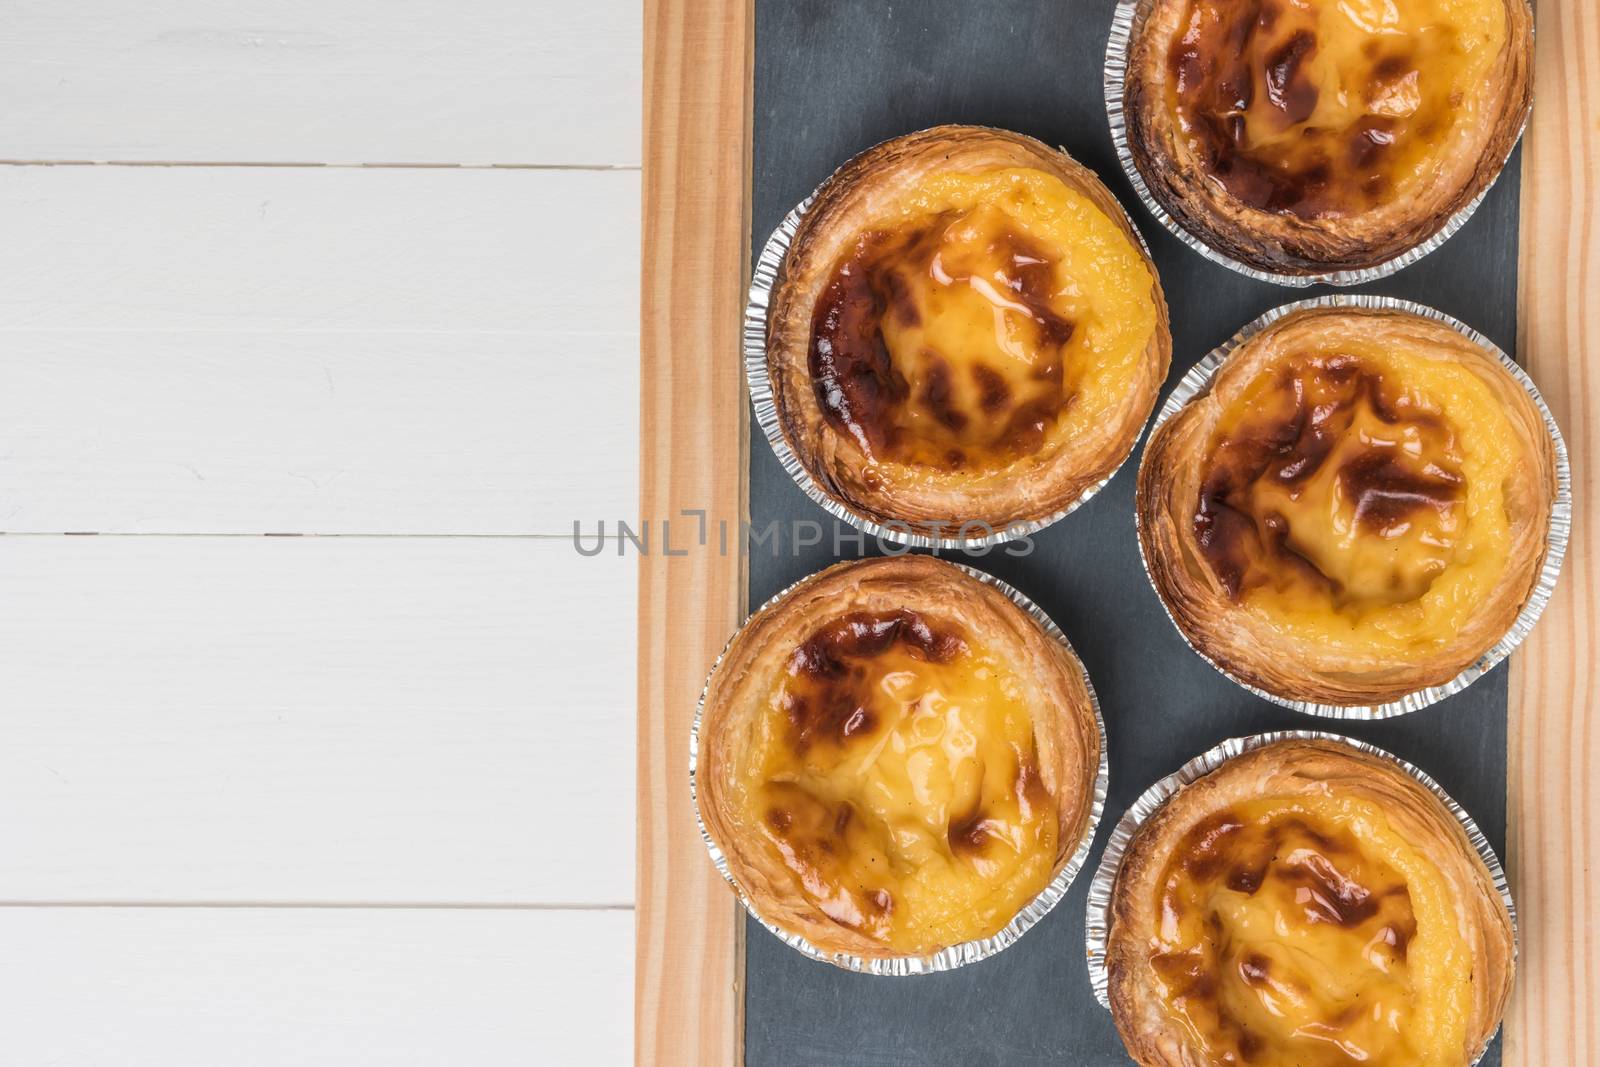 Pasteis de nata, typical Portuguese egg tart pastries from Lisbo by AnaMarques